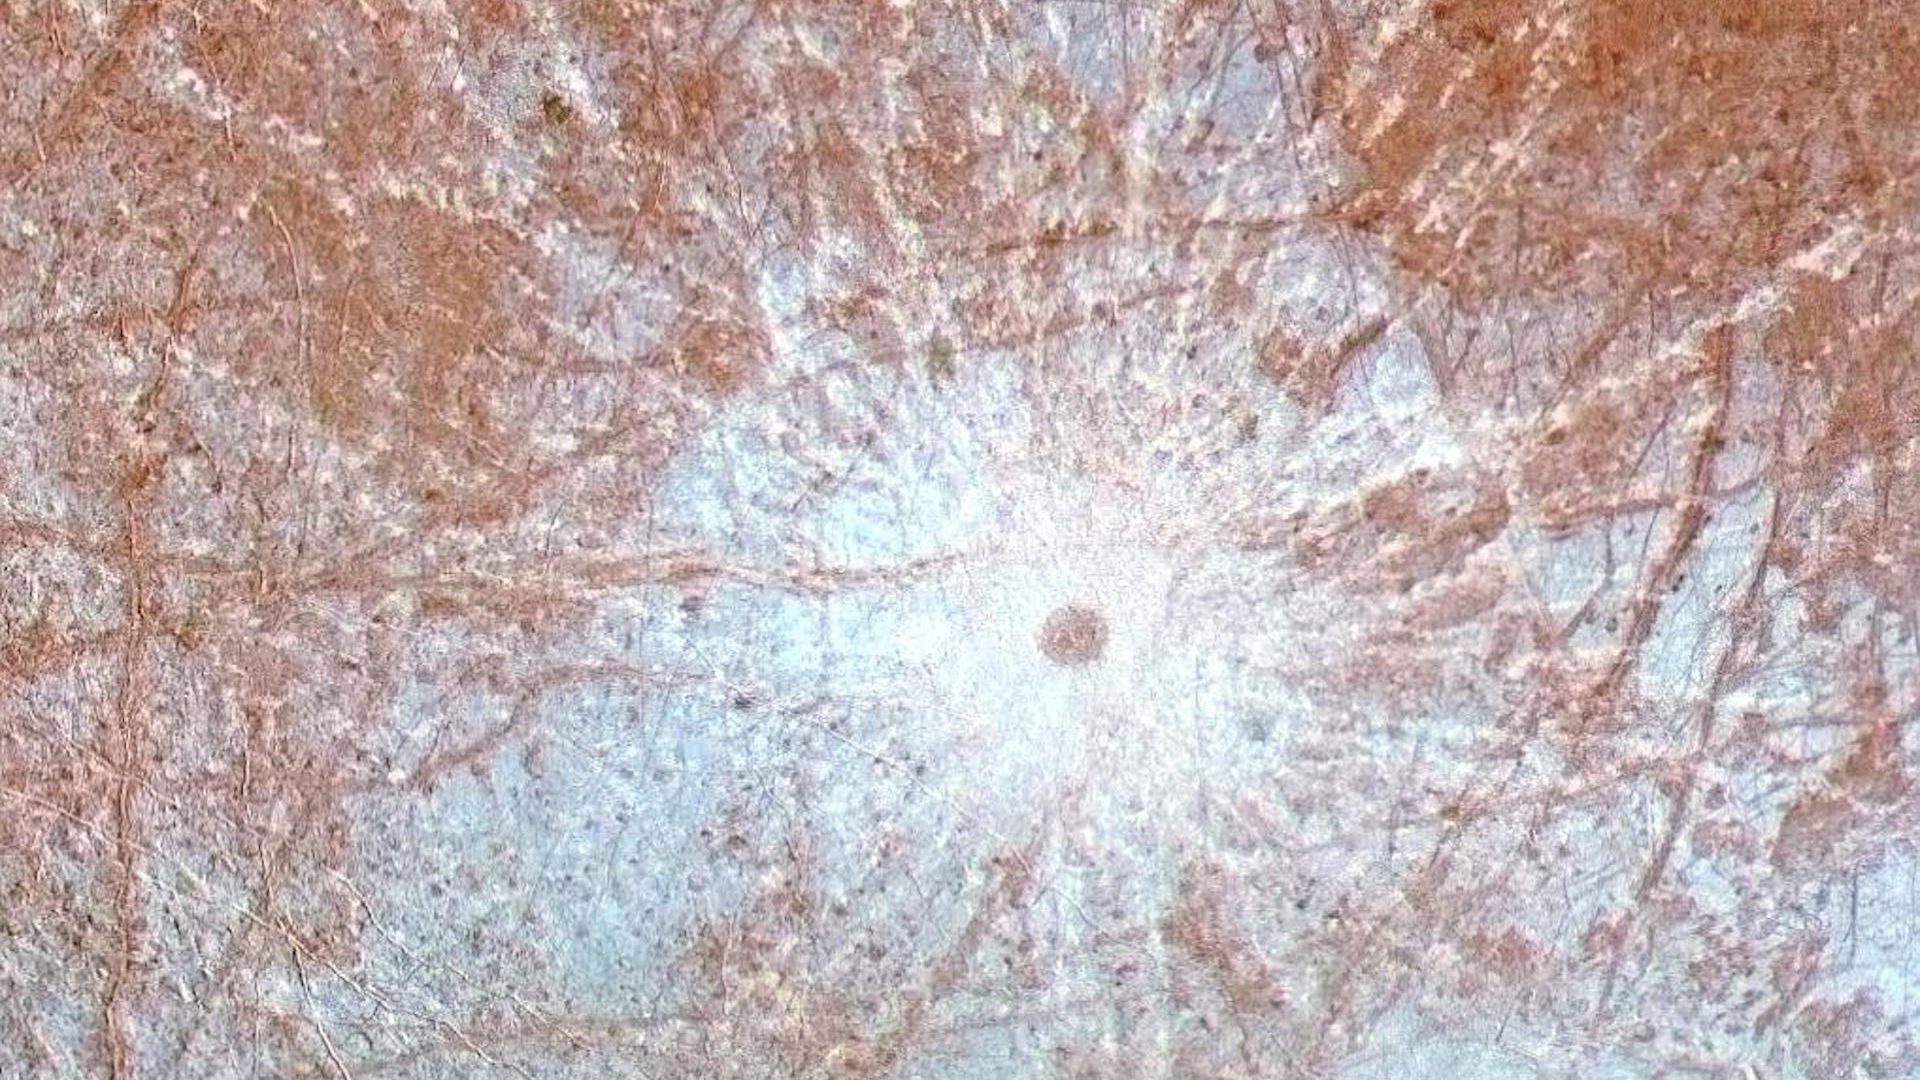 A crater on Europa.